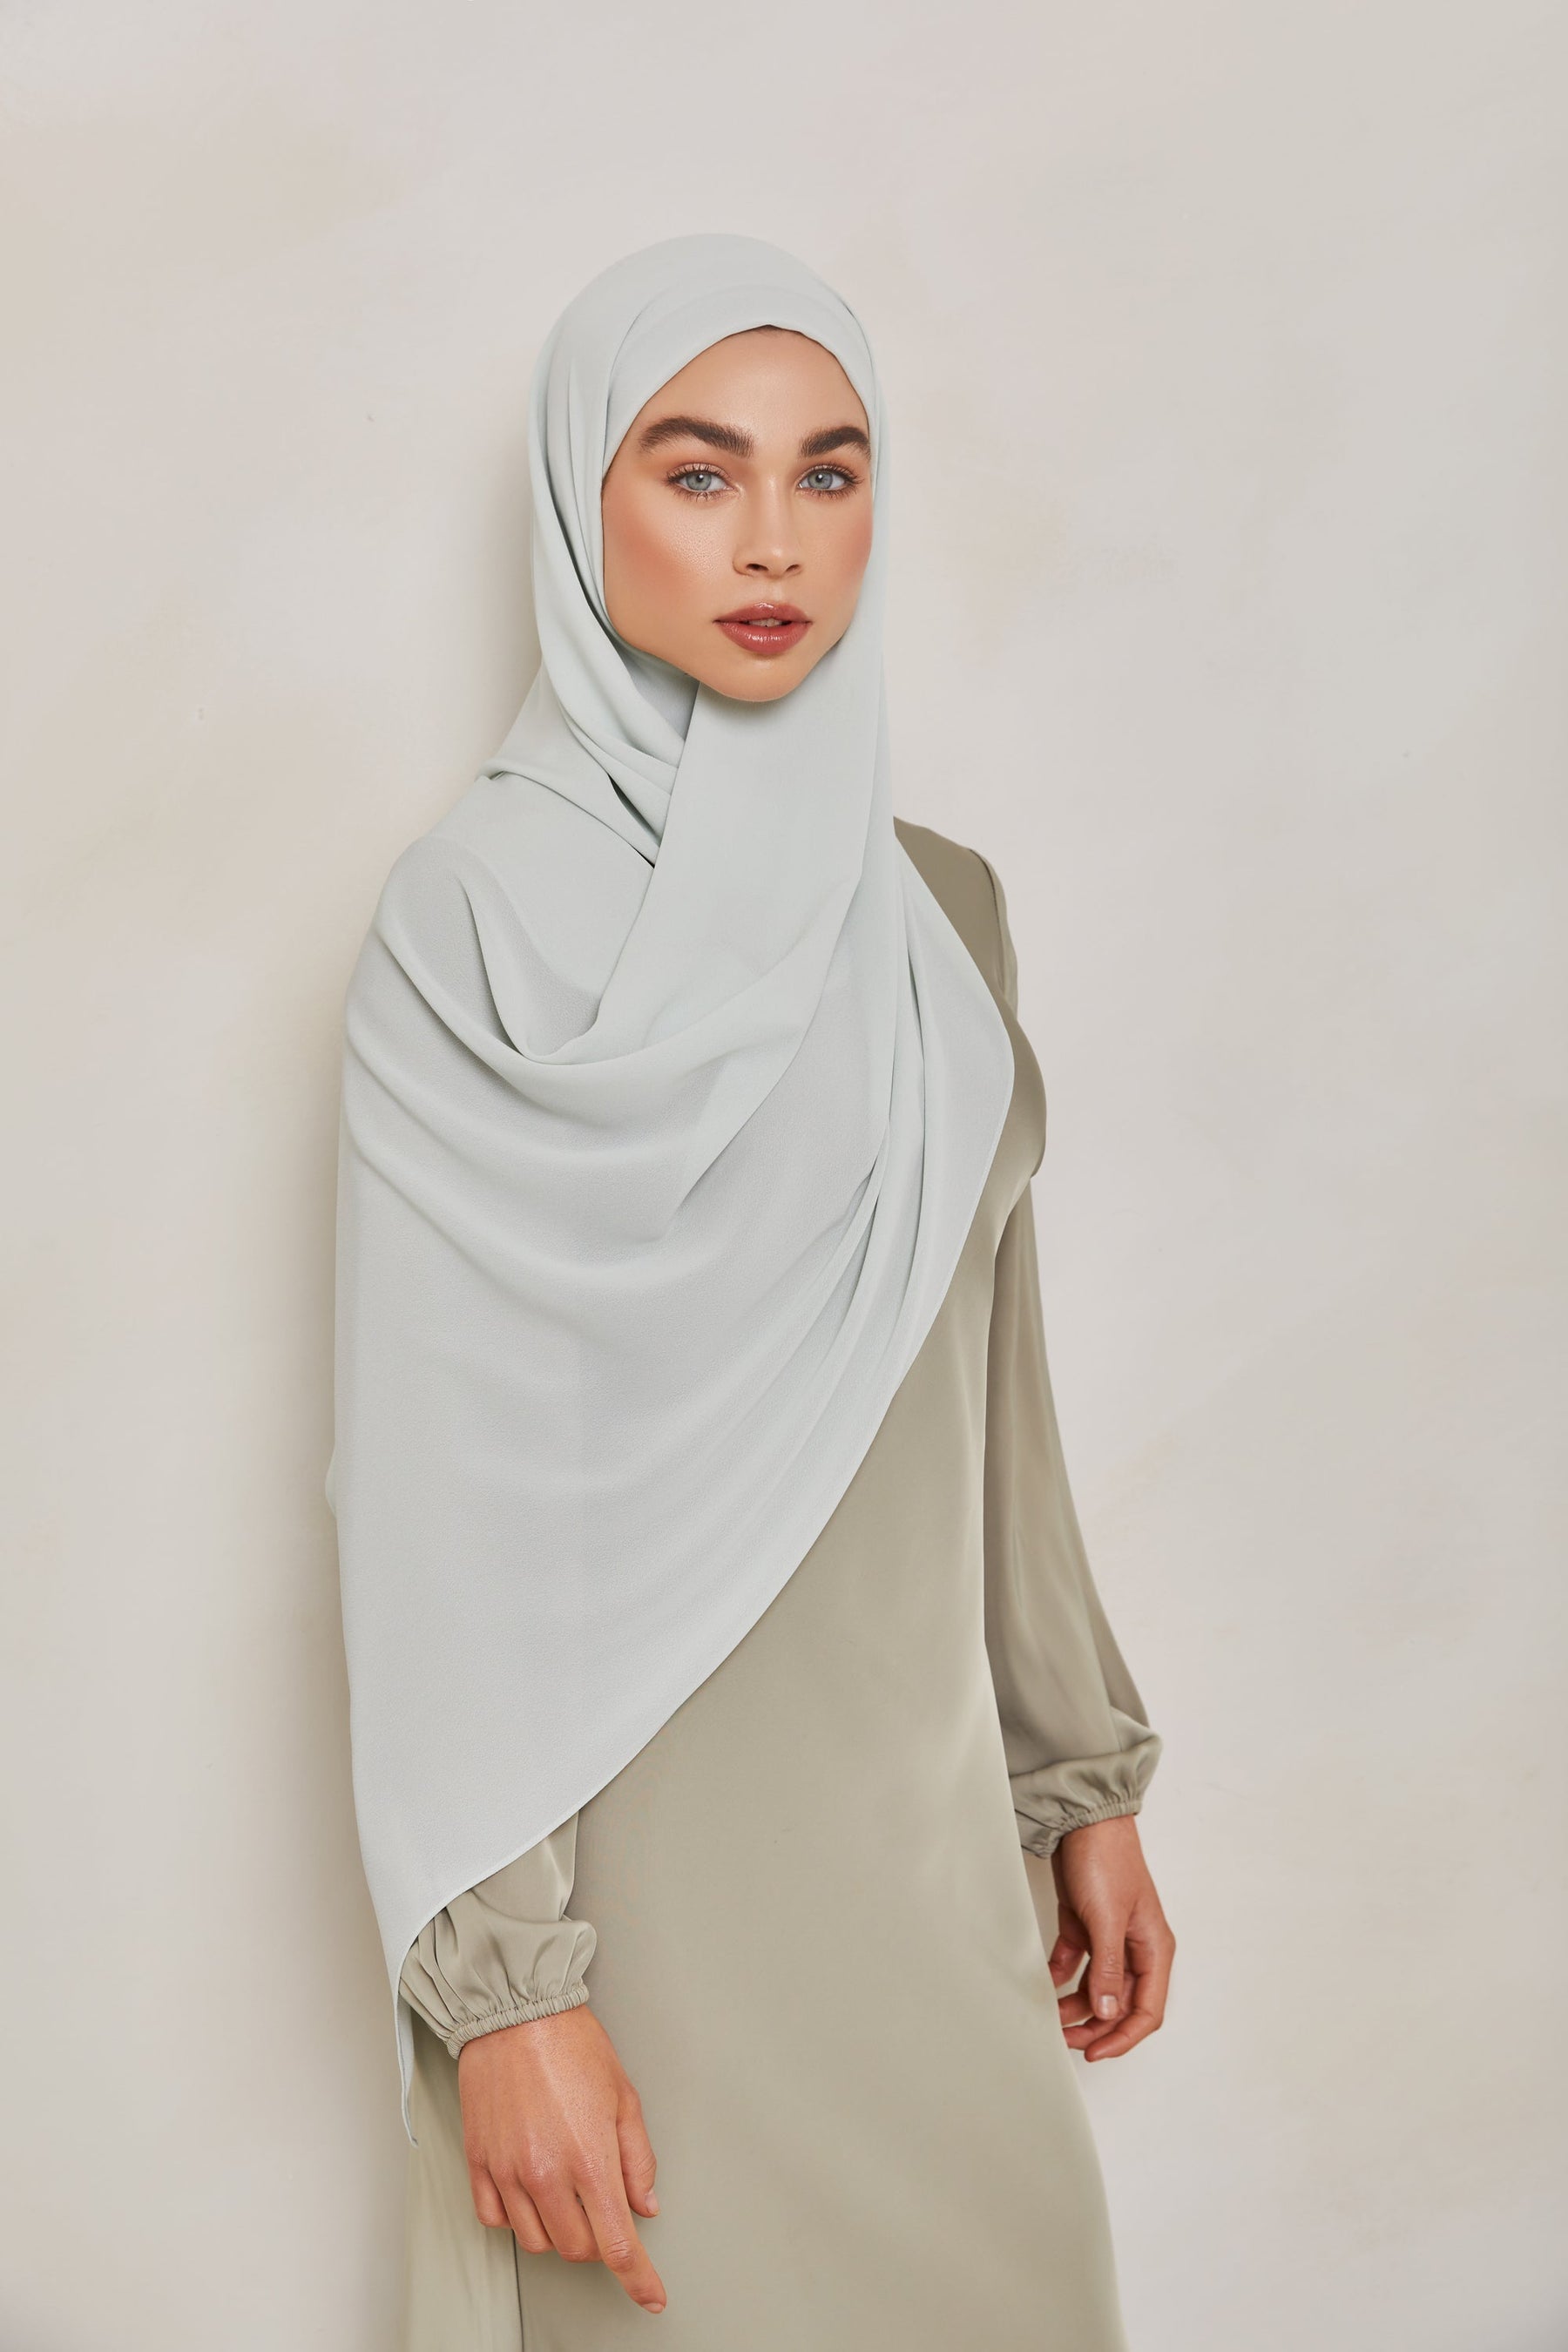 TEXTURE Everyday Chiffon Hijab - Seascape Veiled Collection 